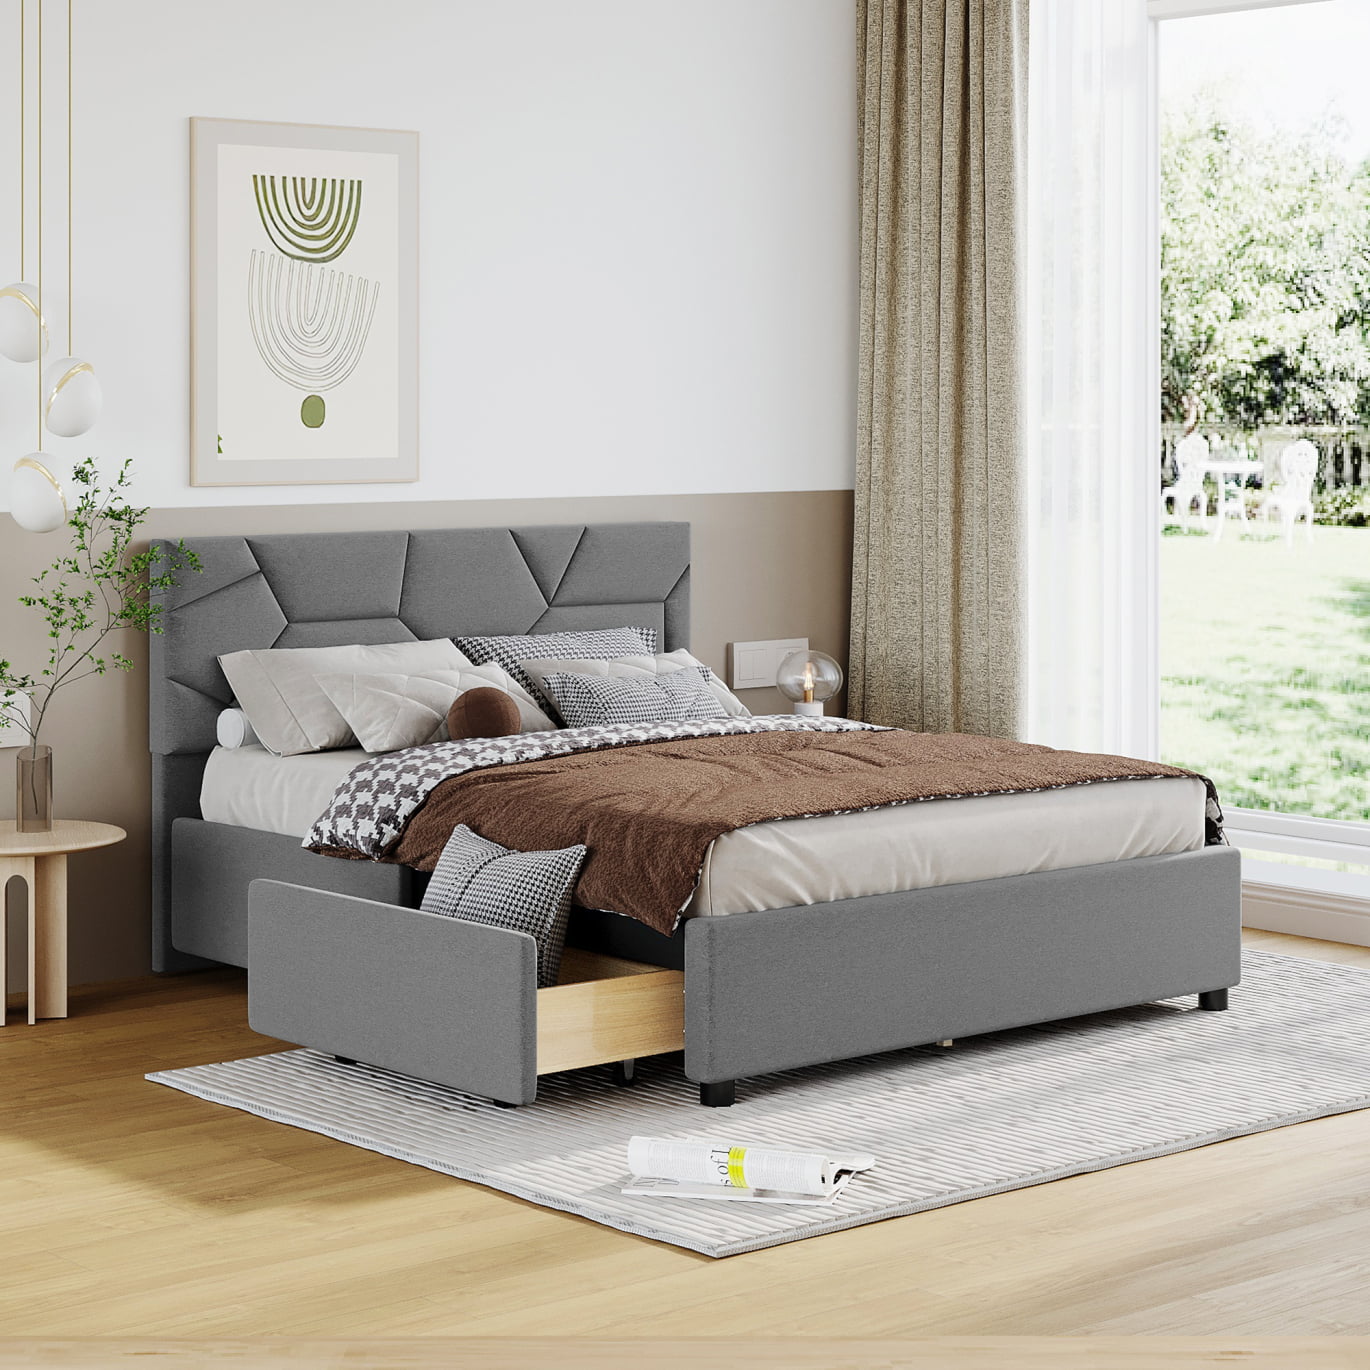 Queen Size Upholstered Platform Bed with 4 Storage Drawers, Modern 